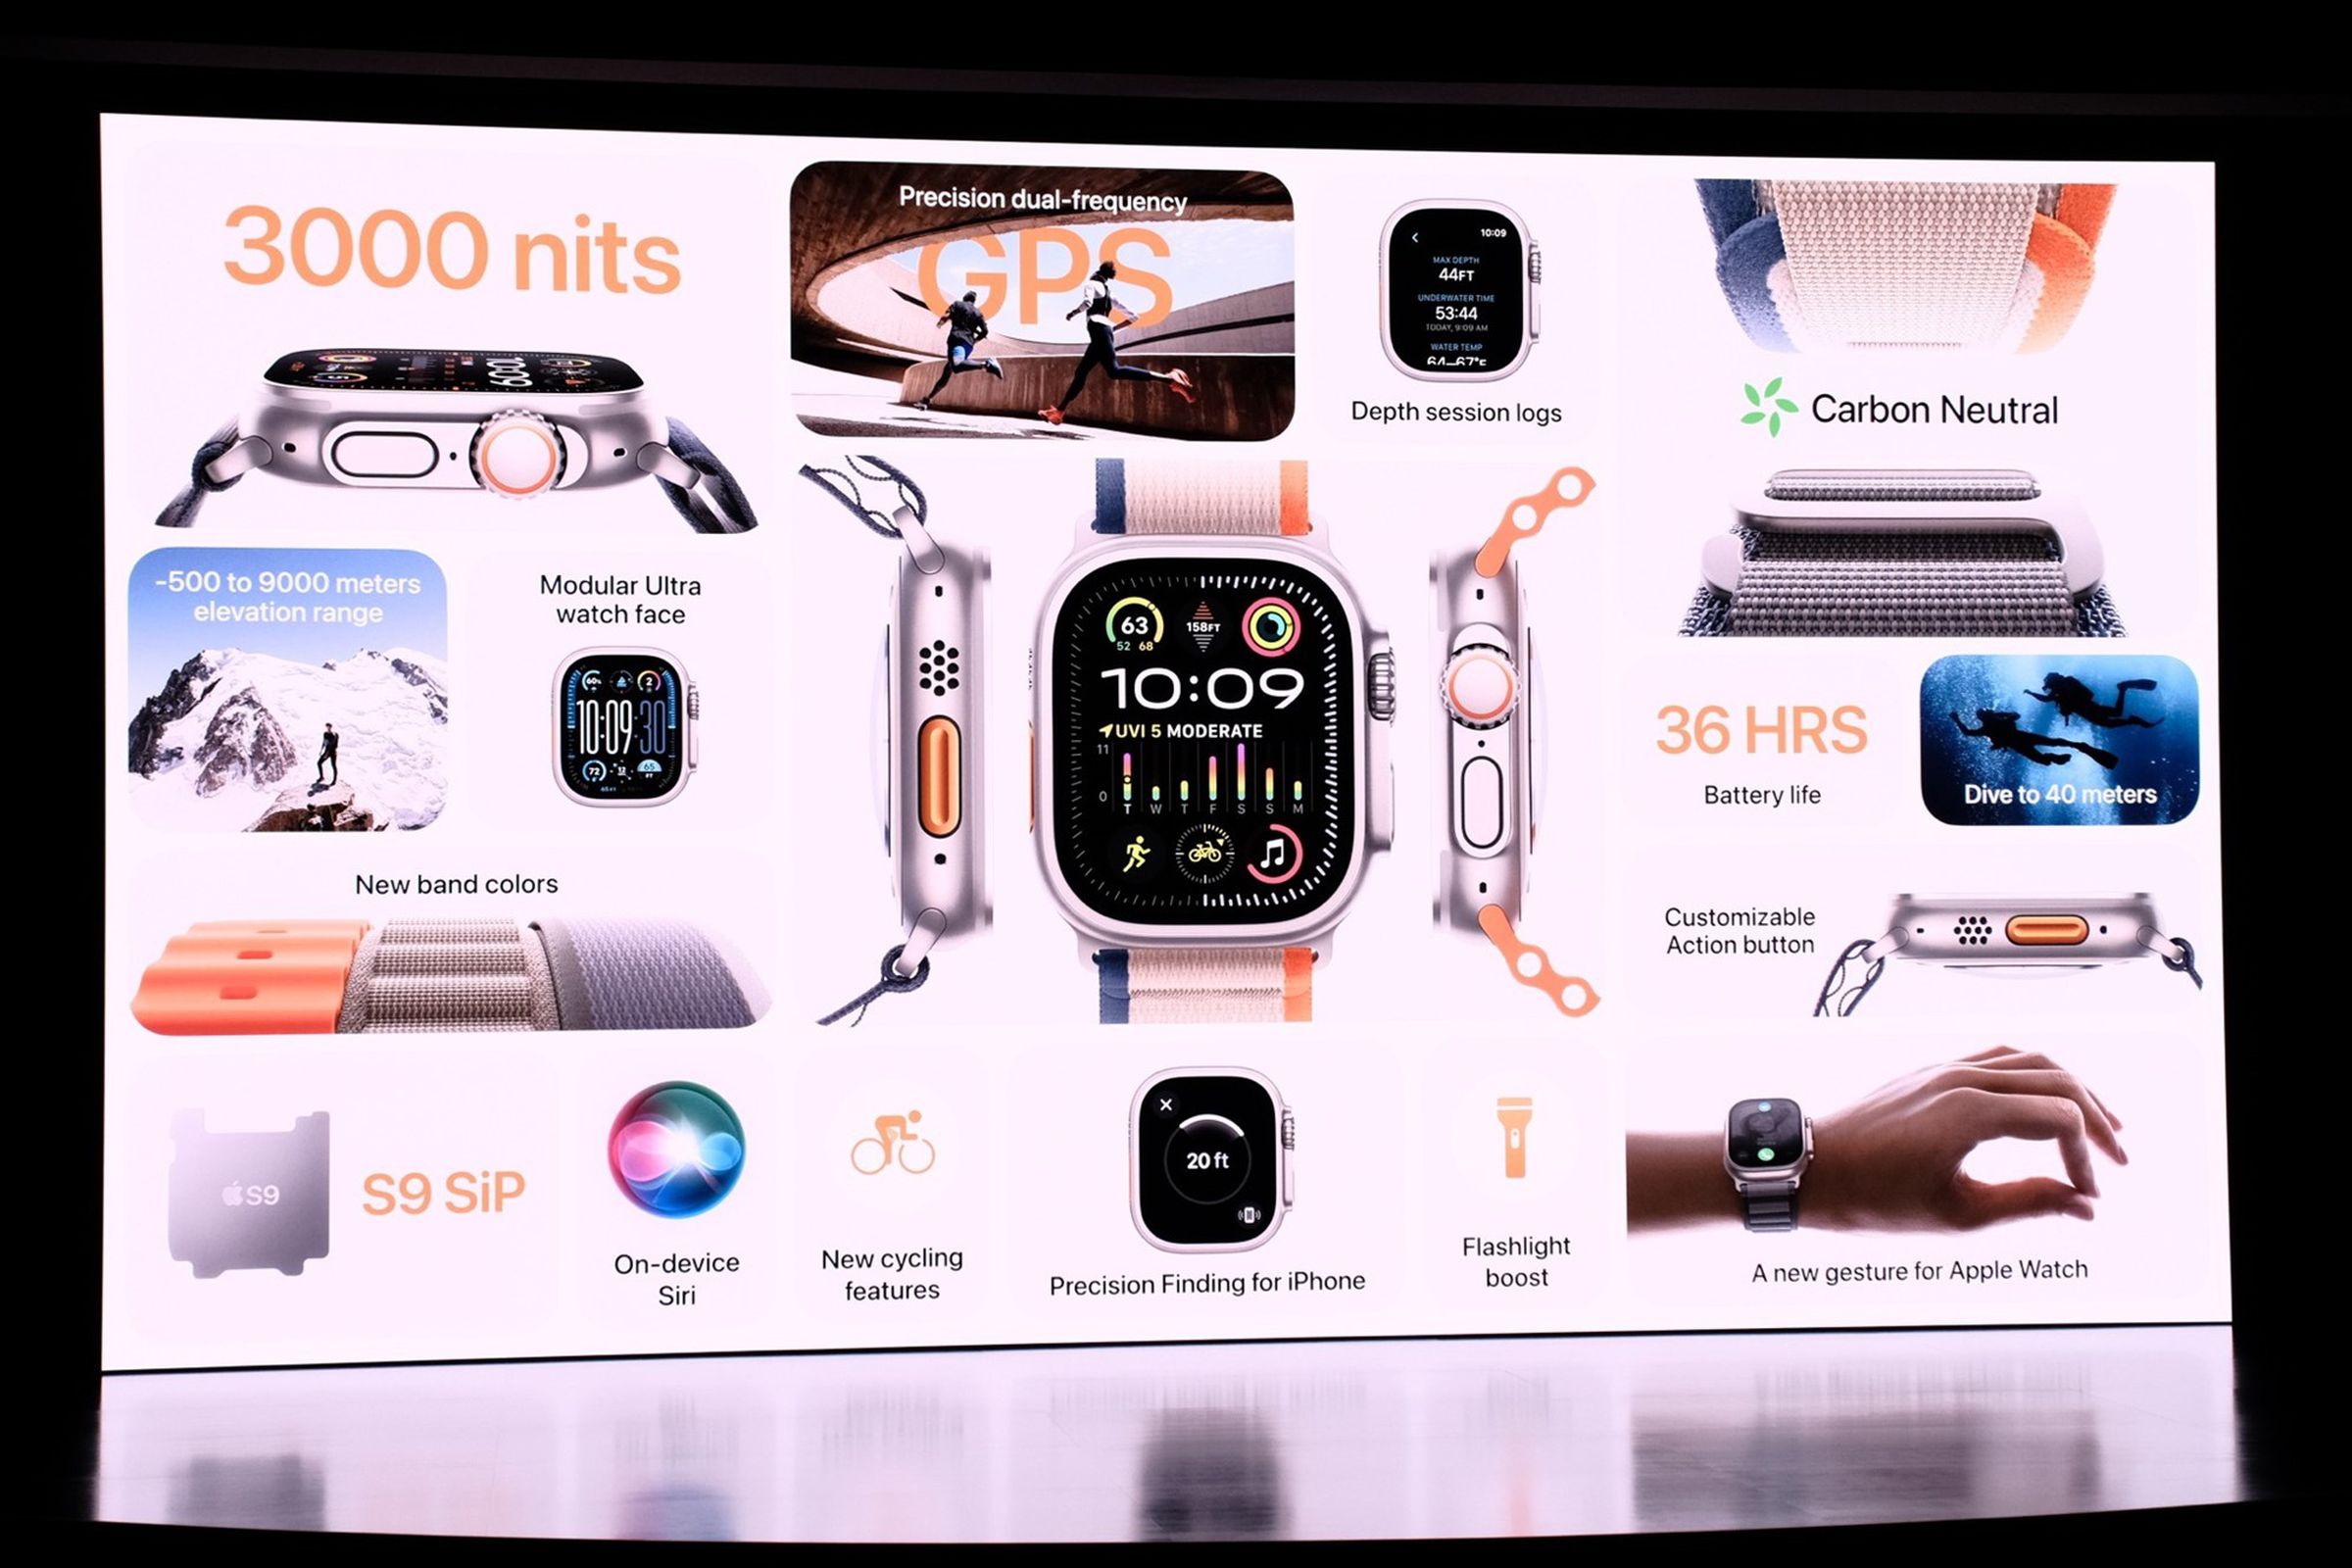 A screenshot from the Apple event showing Apple Watch Ultra 2 specs including 3000 nits, carbon neutral, 36 hours, new band colors, modulare ultra watch face, and customizable action button.